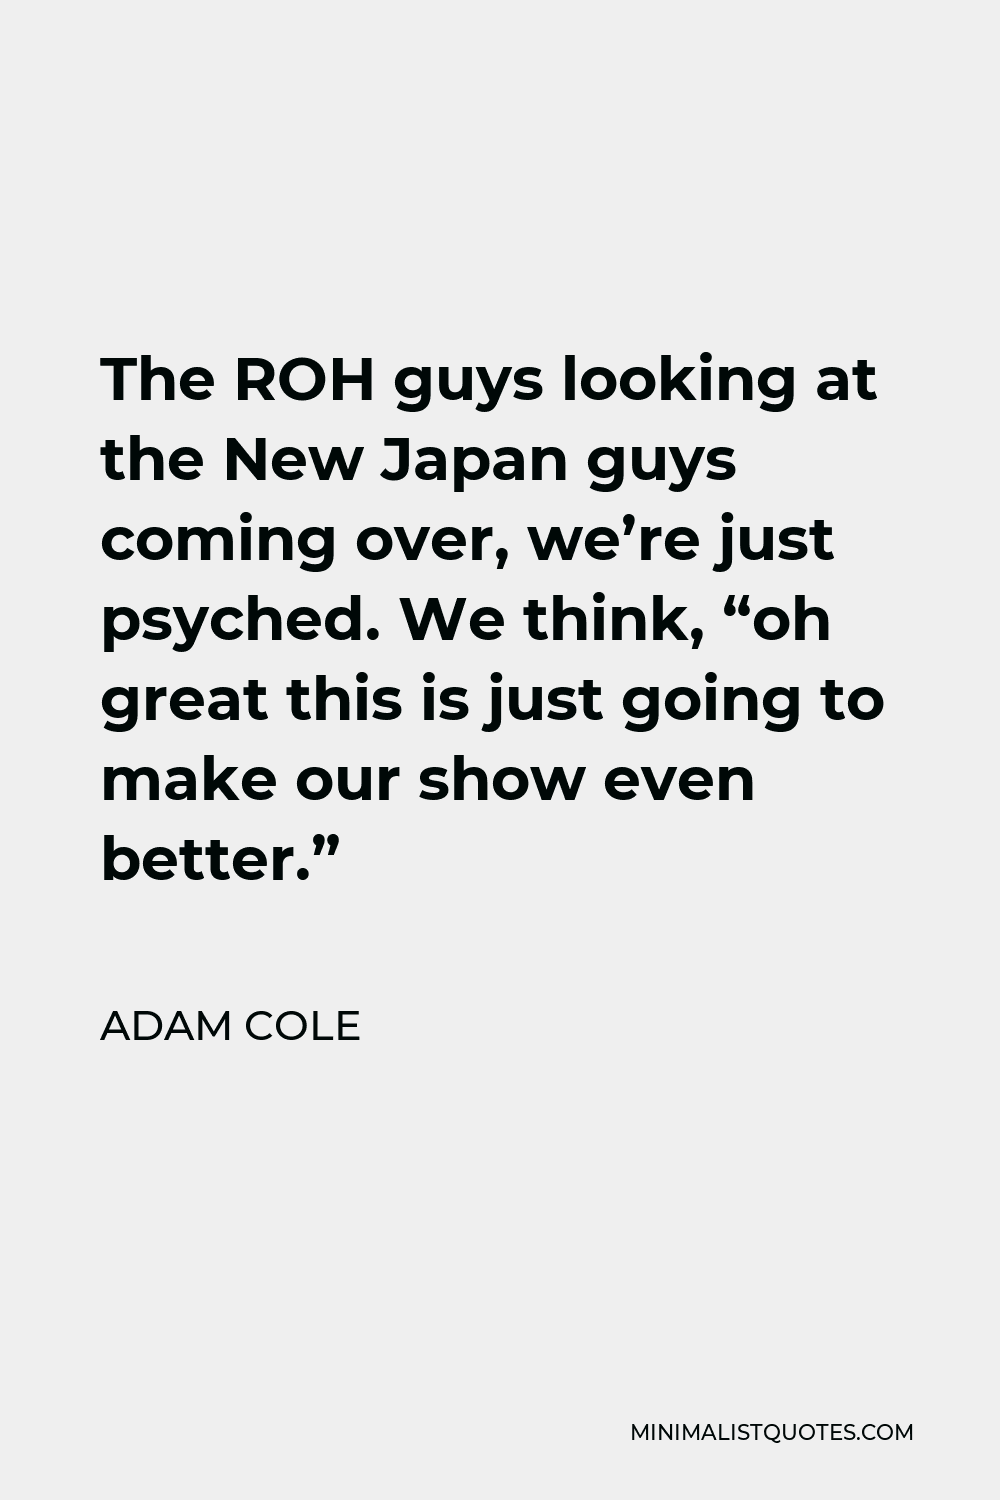 Adam Cole Quote - The ROH guys looking at the New Japan guys coming over, we’re just psyched. We think, “oh great this is just going to make our show even better.”